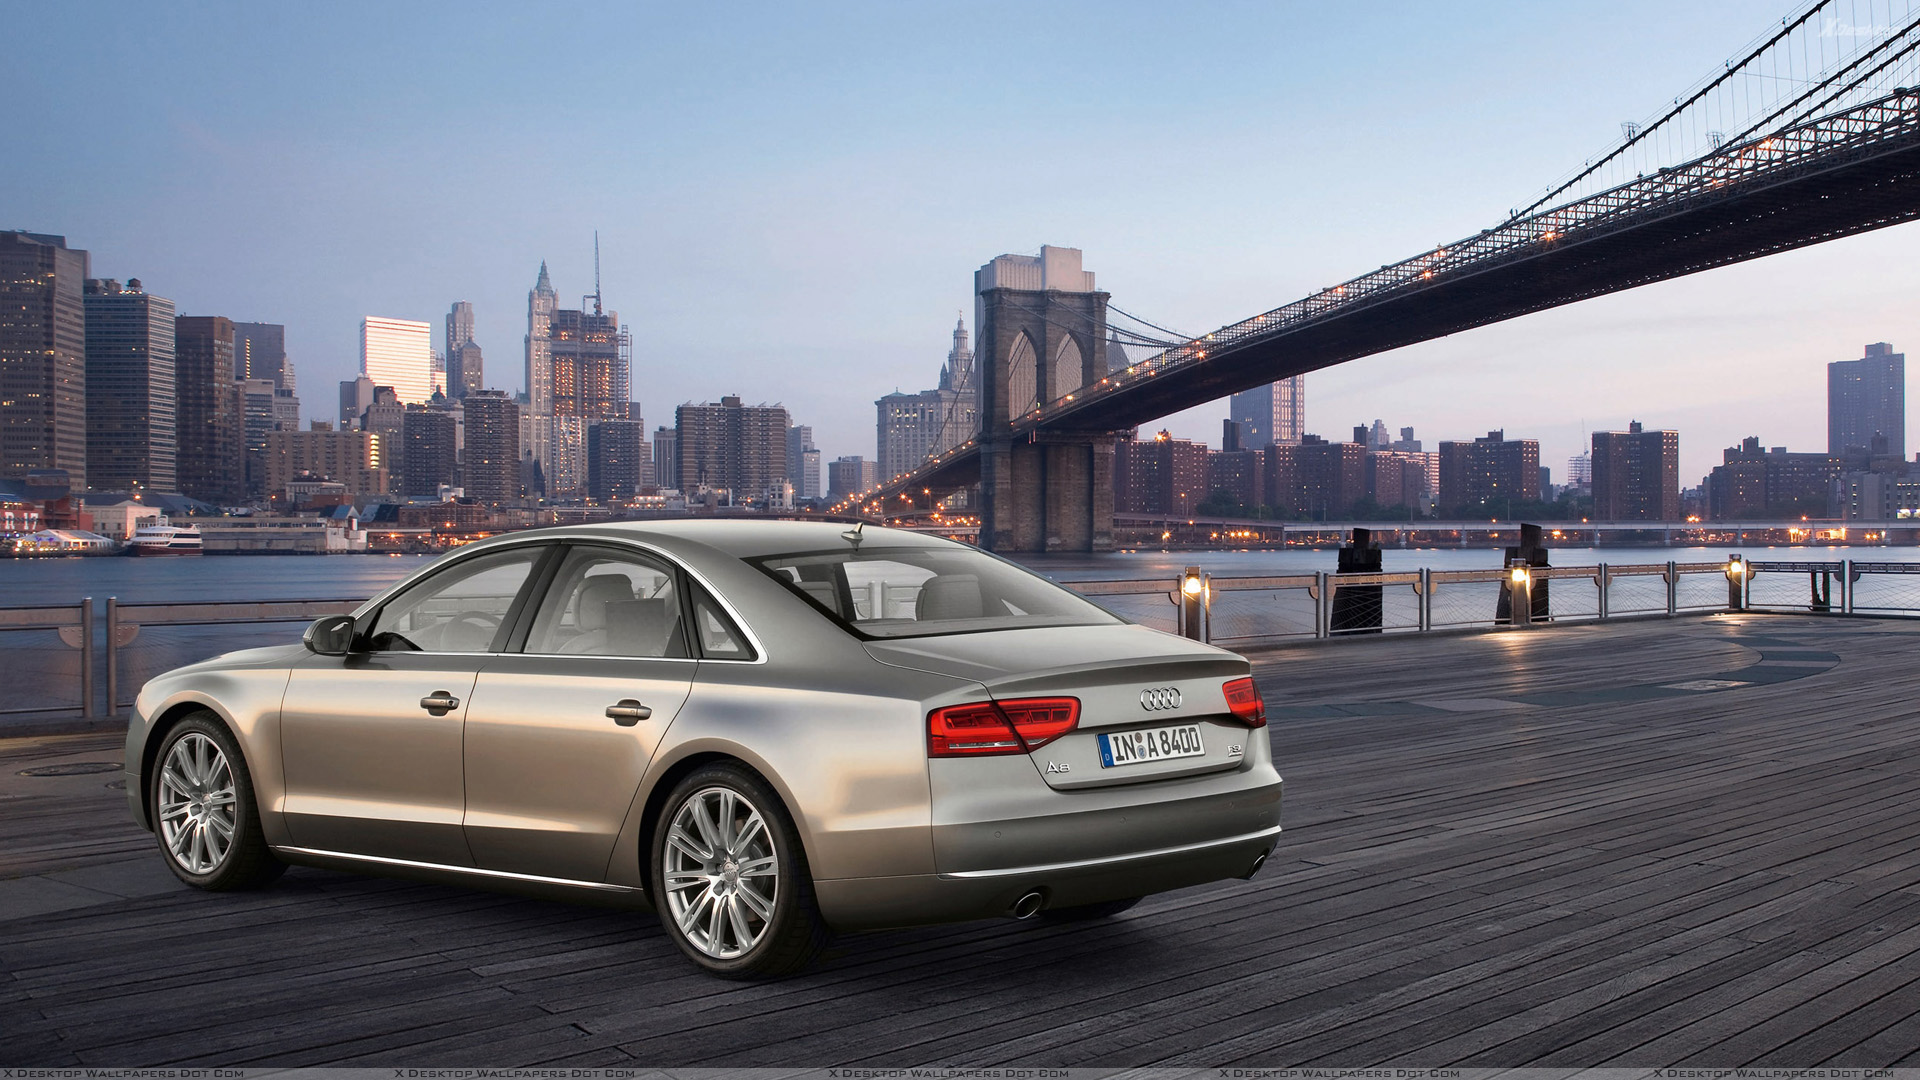 Audi A8 Wallpaper Photos Image In HD